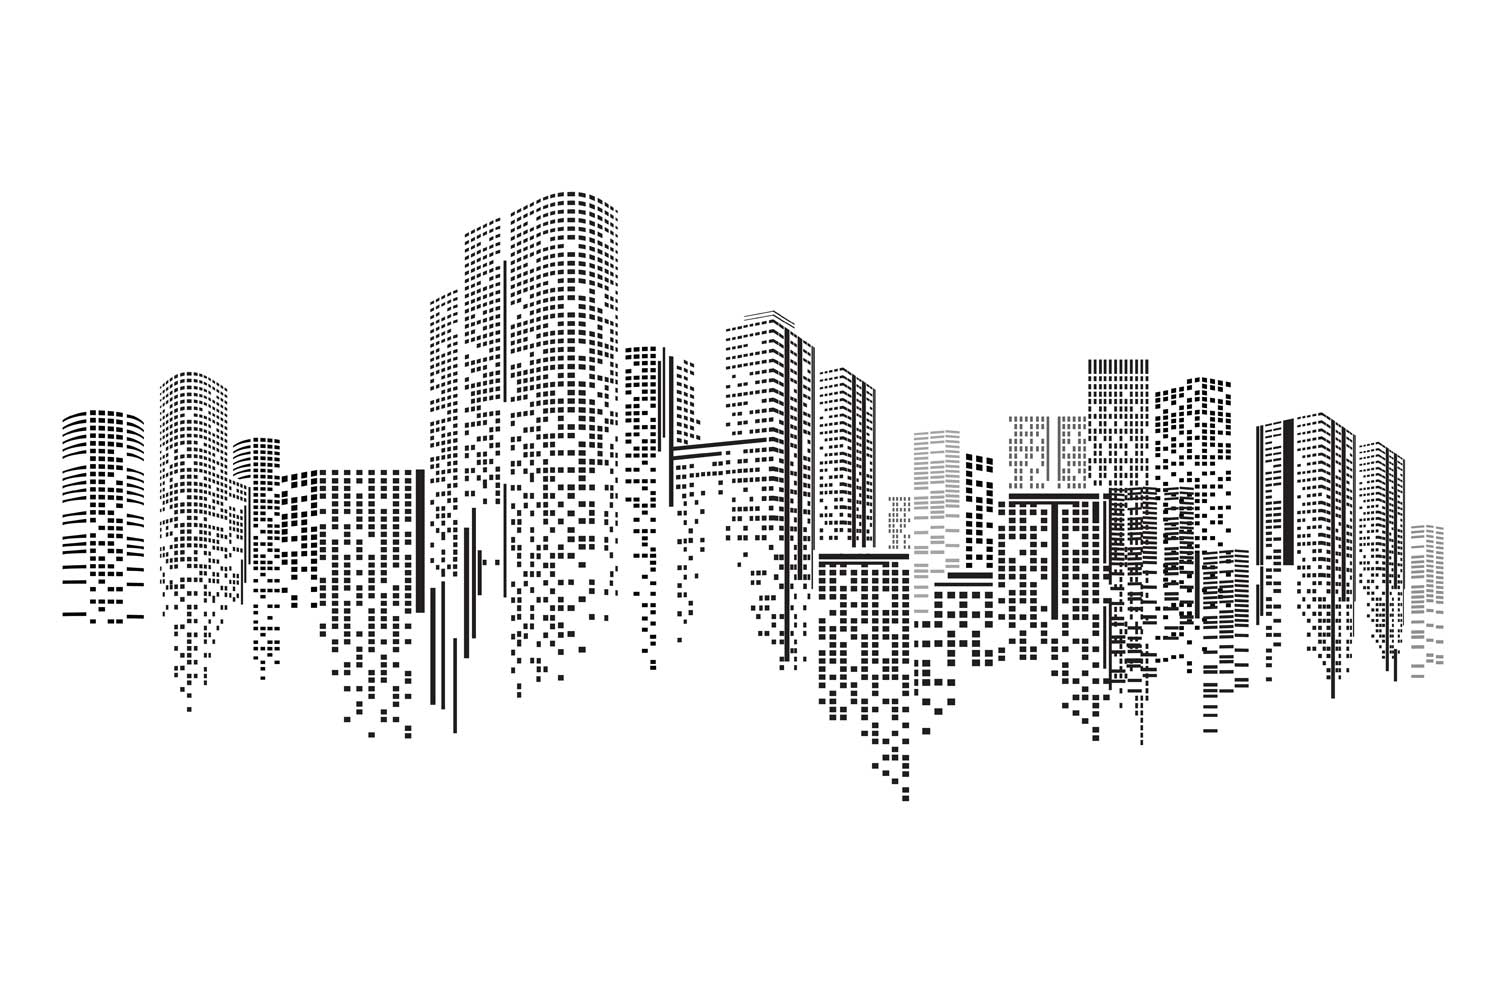 Black and white abstract image of a city